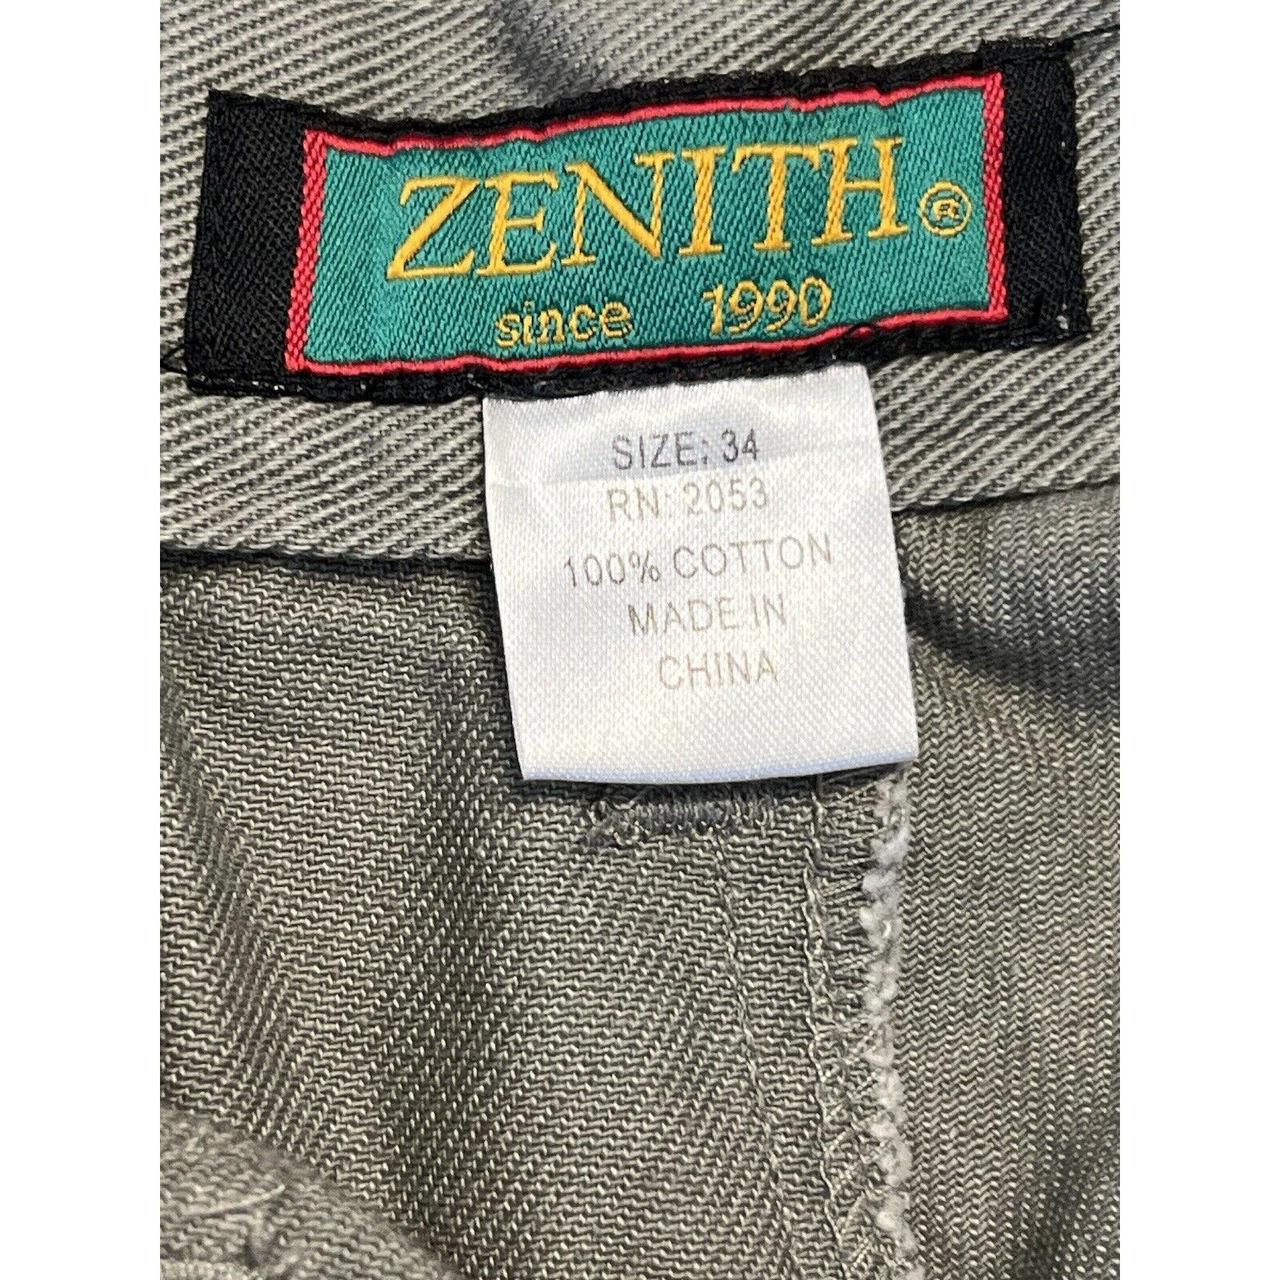 Product Image 3 - NWT Zenith Jants Mens Cargo